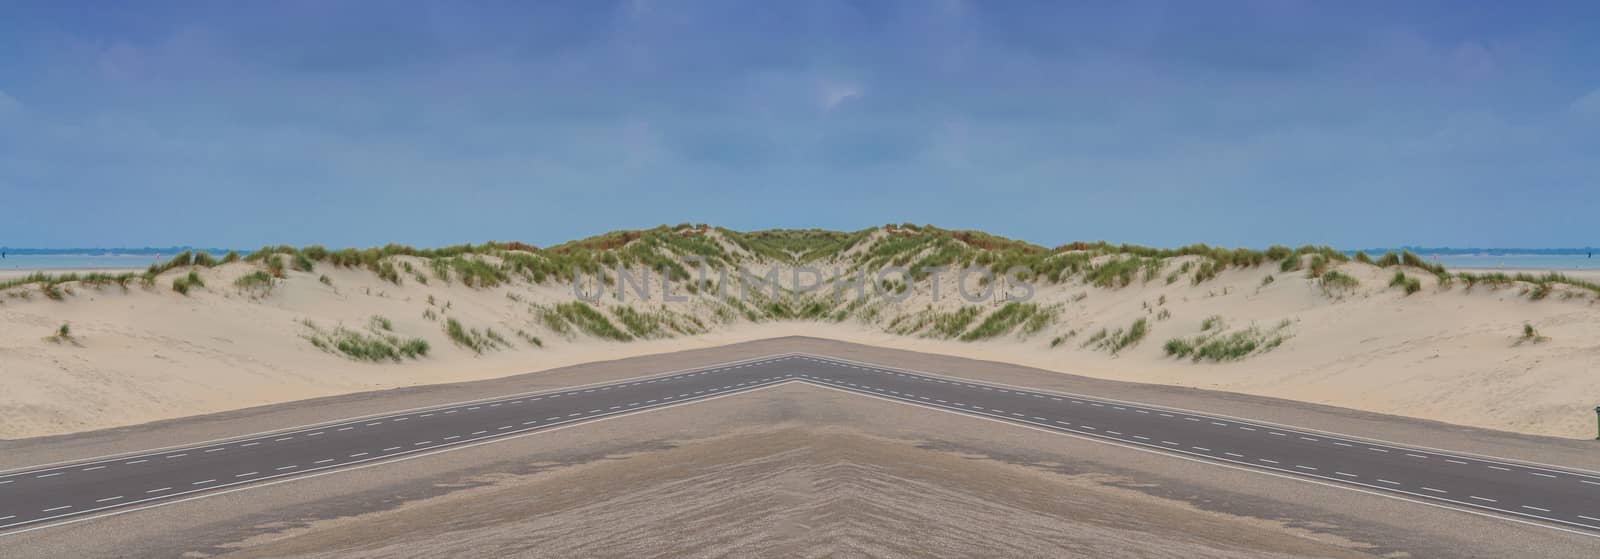 Panorama of a large sand dune in Holland.  by JFsPic